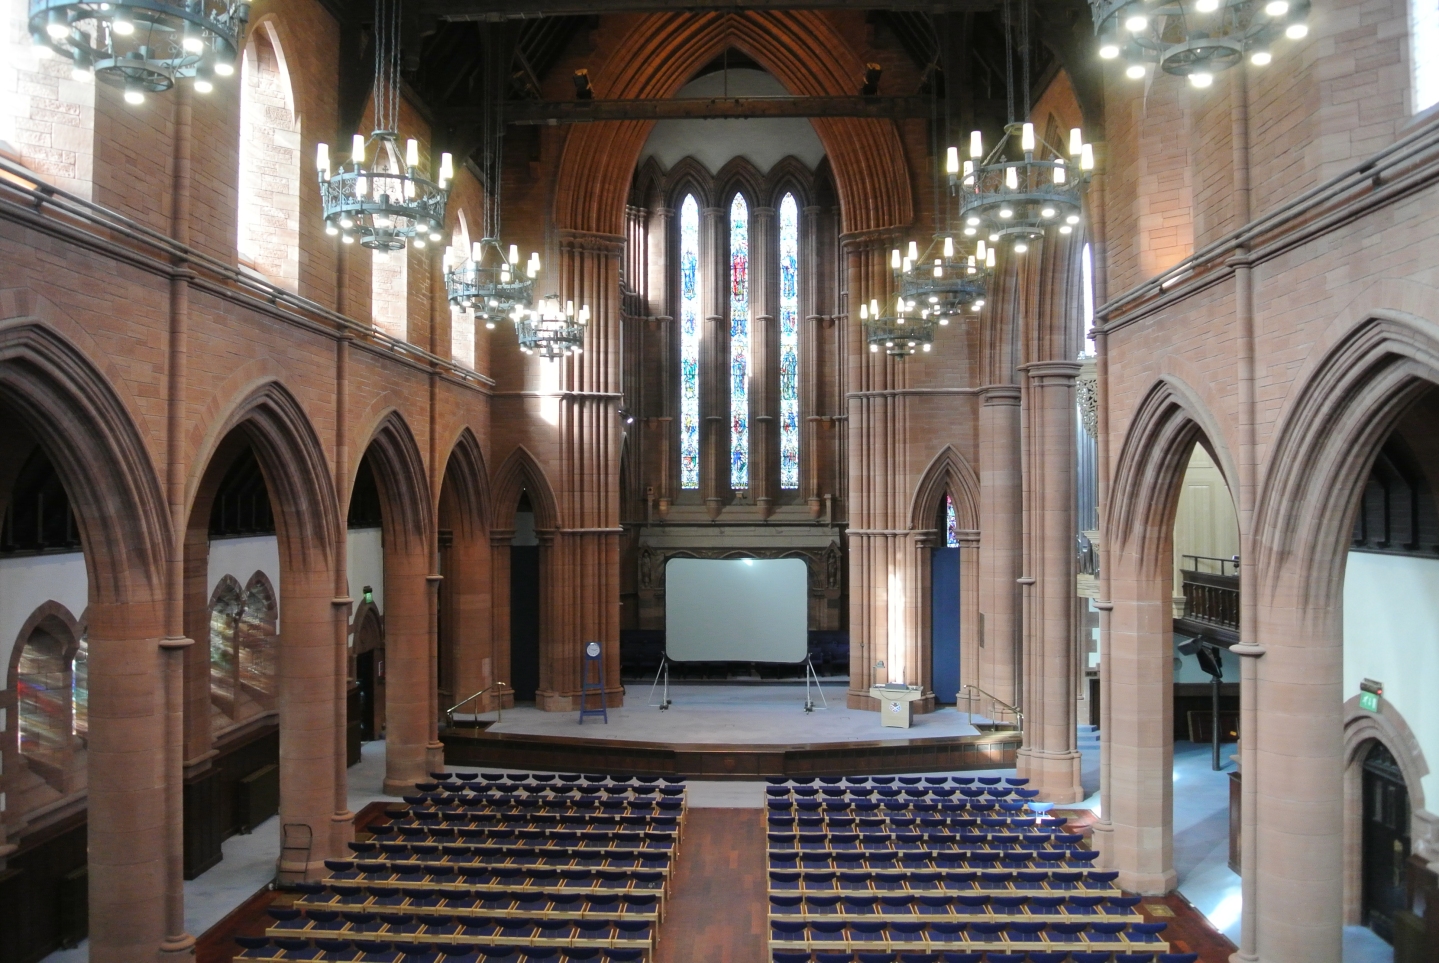 Barony Hall - looking down the nave from the balcony